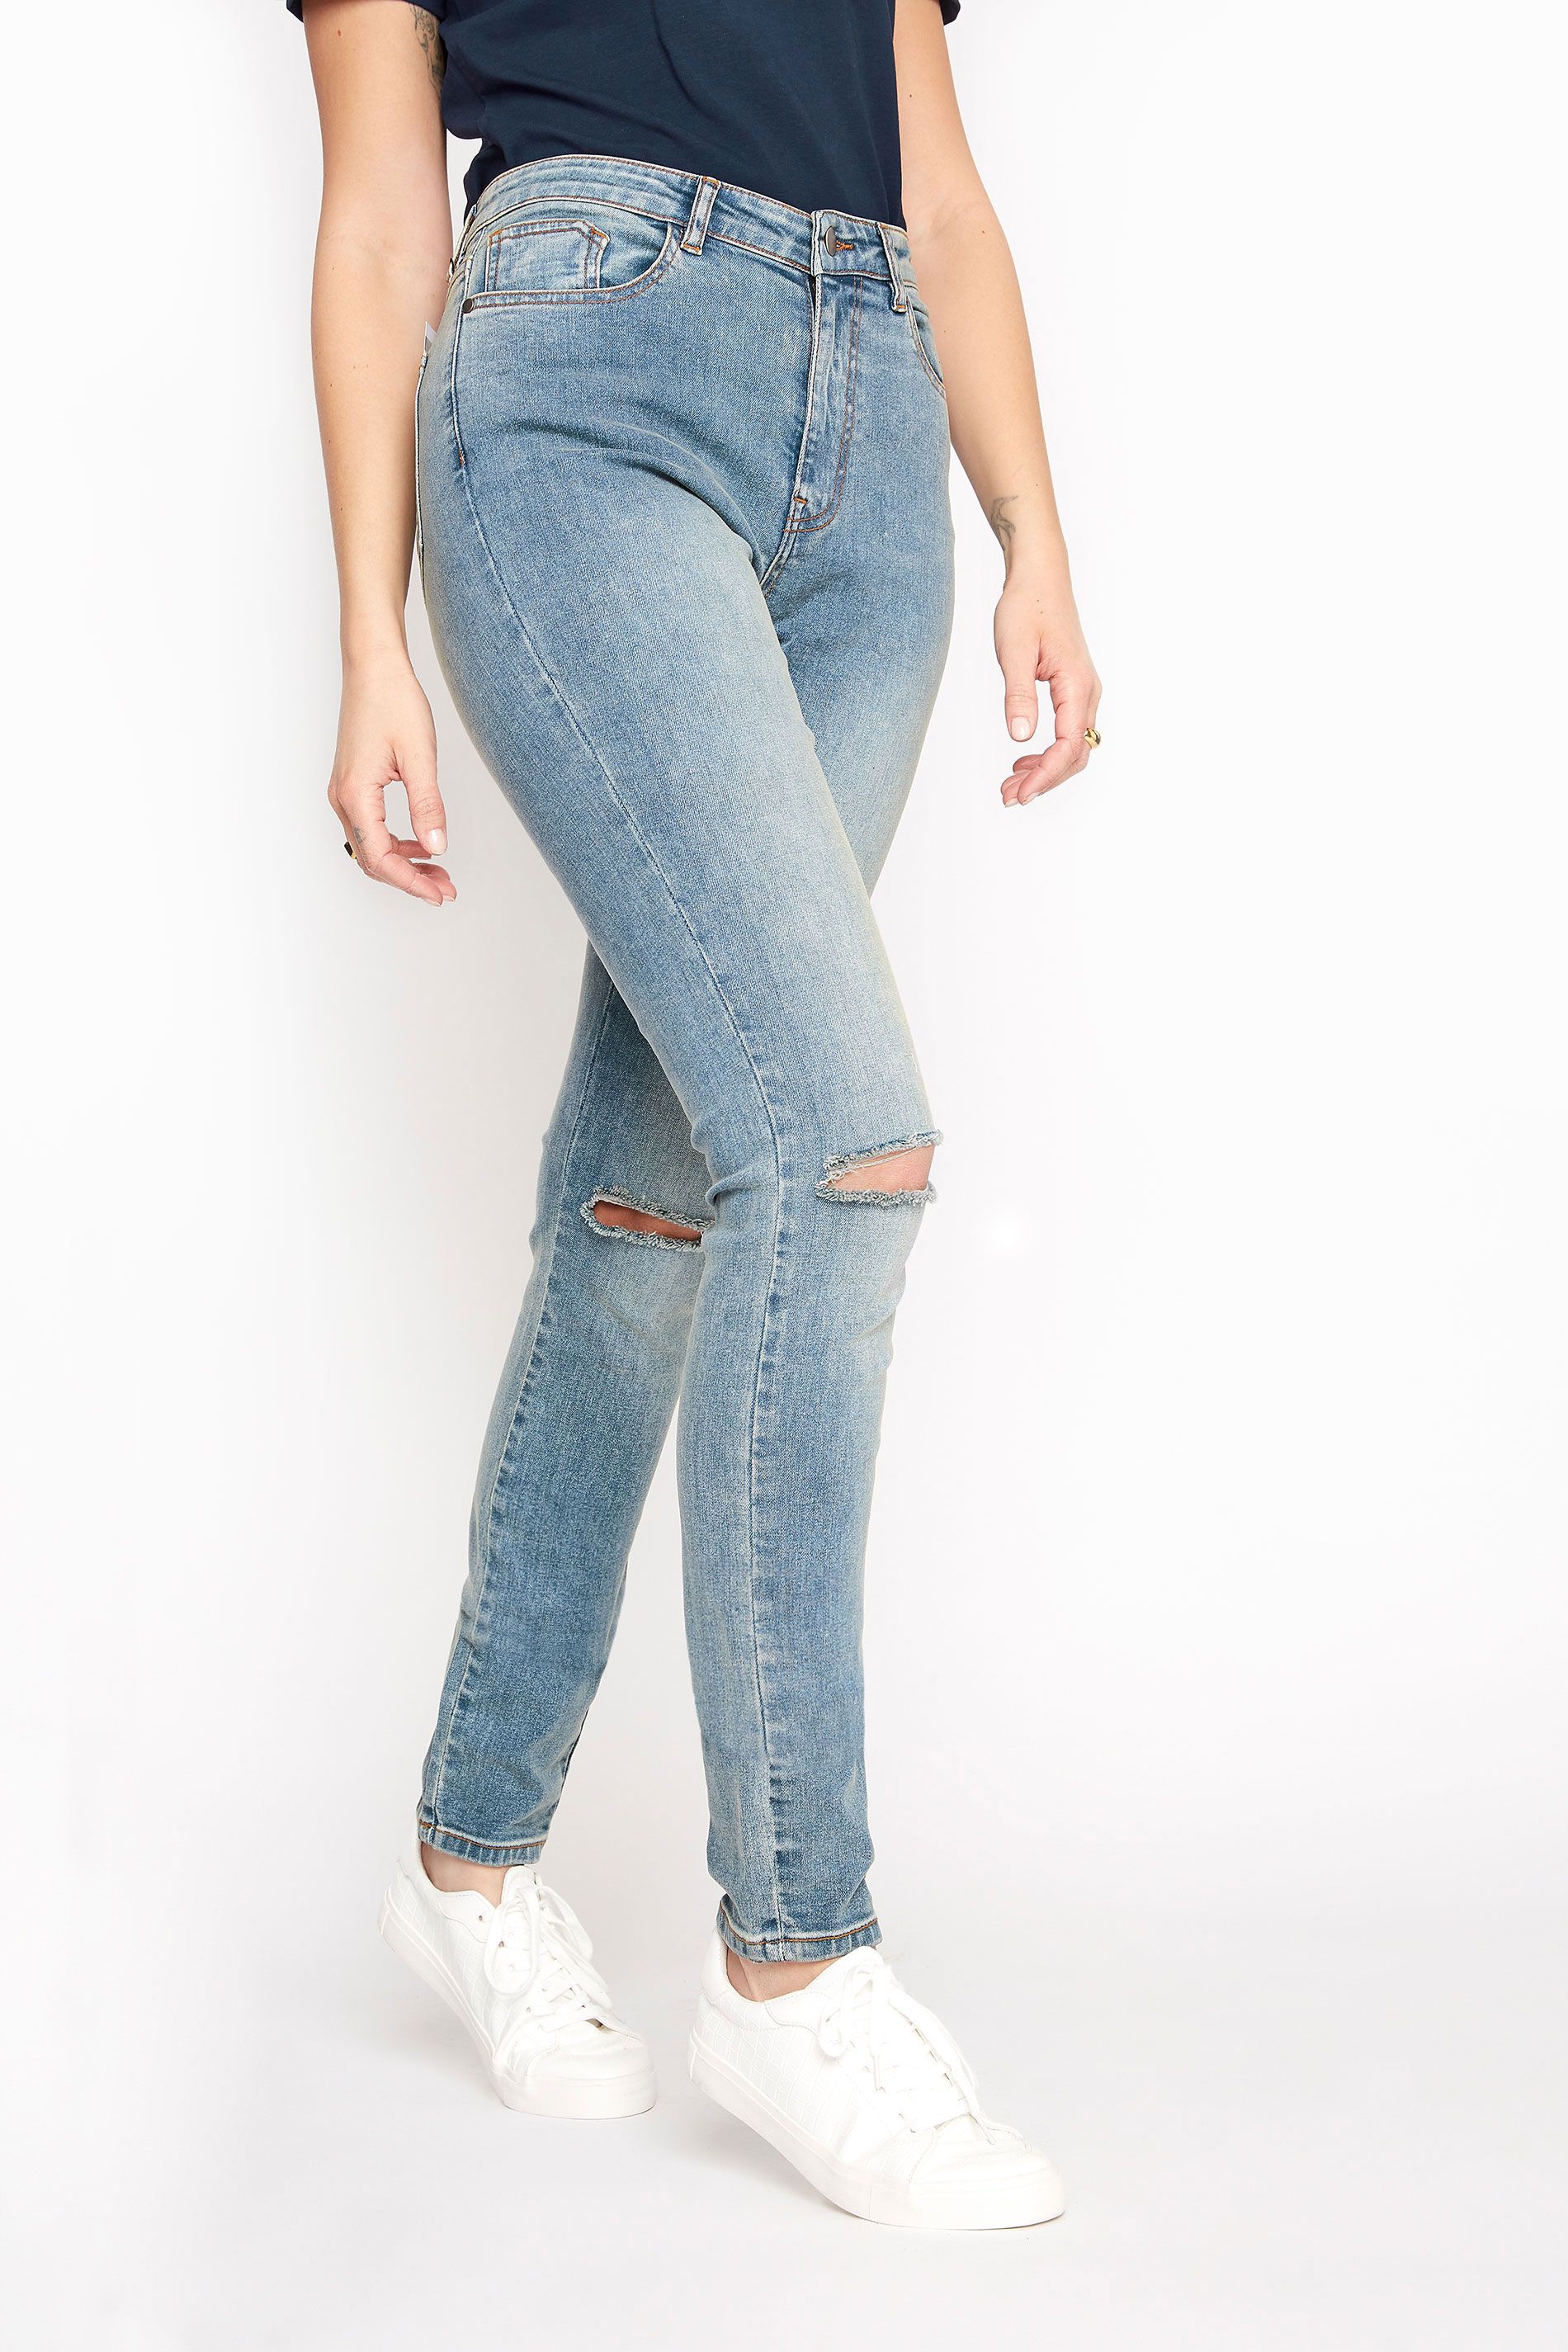 LTS Tall Light Blue Vintage Ripped AVA Skinny Jeans | Long Tall Sally